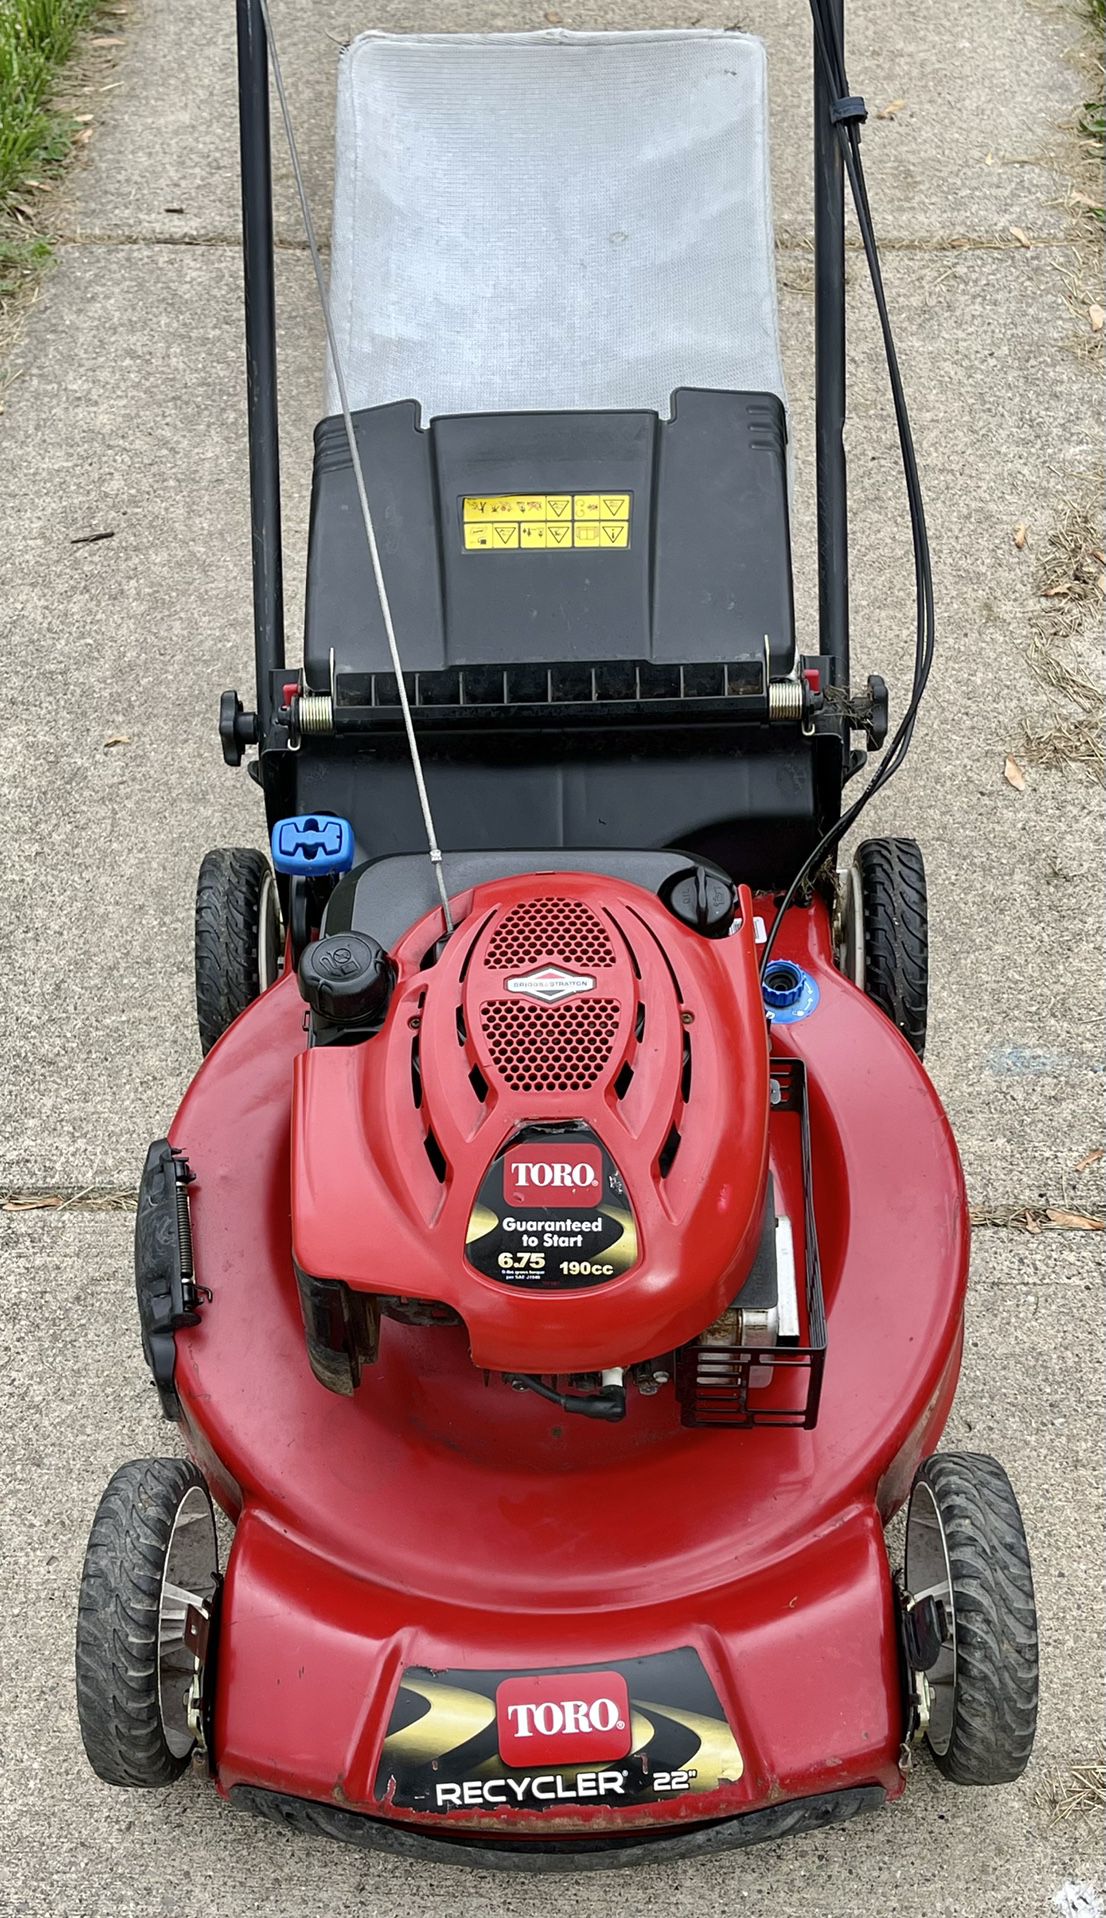 Toro Recycler 22 Self Propelled/Personal Pace Lawn Mower w 6.75hp Briggs & Stratton Motor w Bag